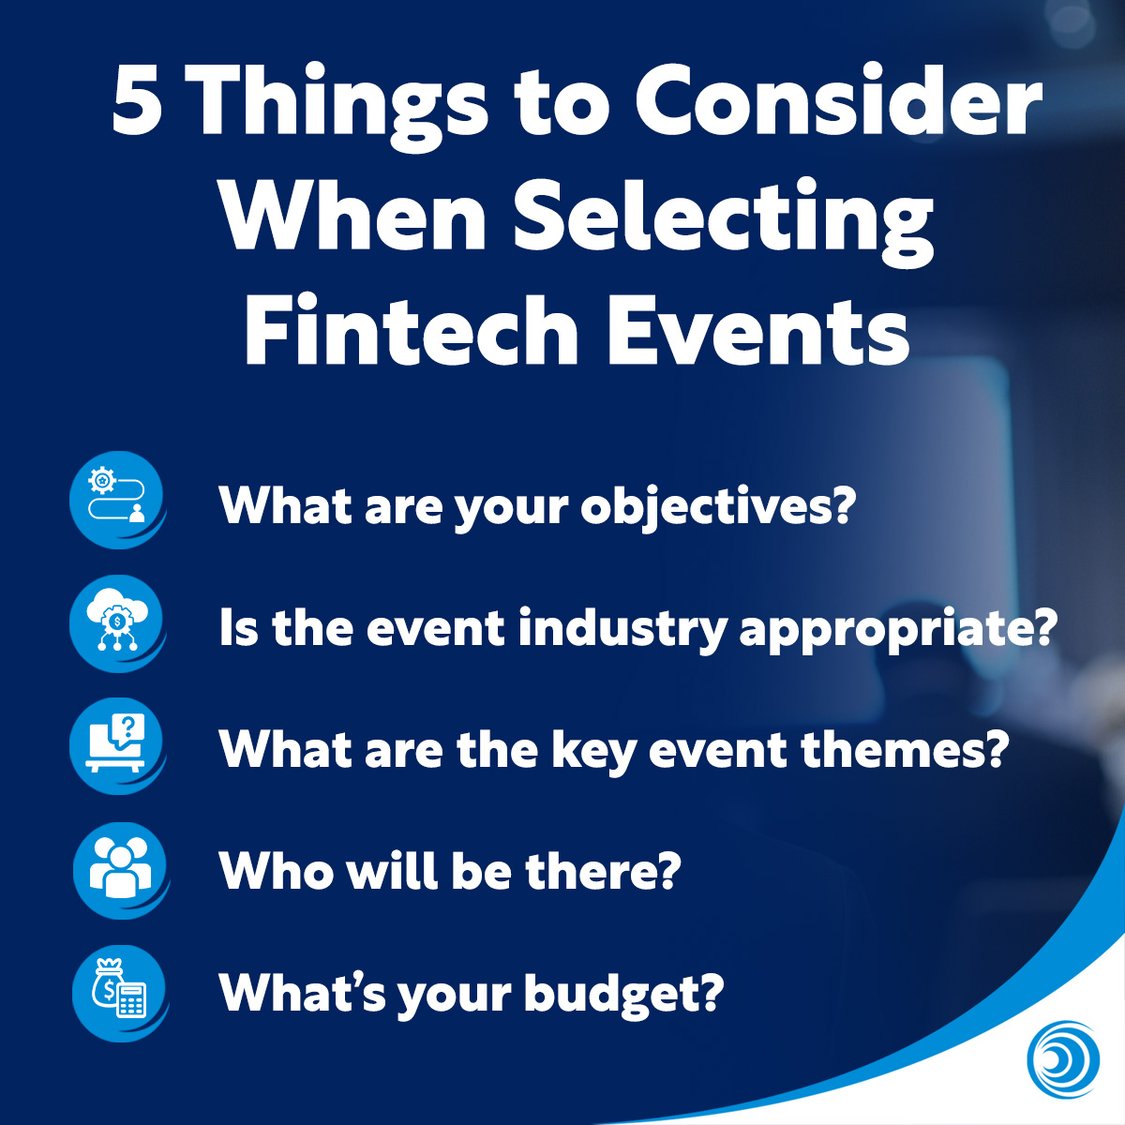 5 Things to Consider When Selecting Fintech Events